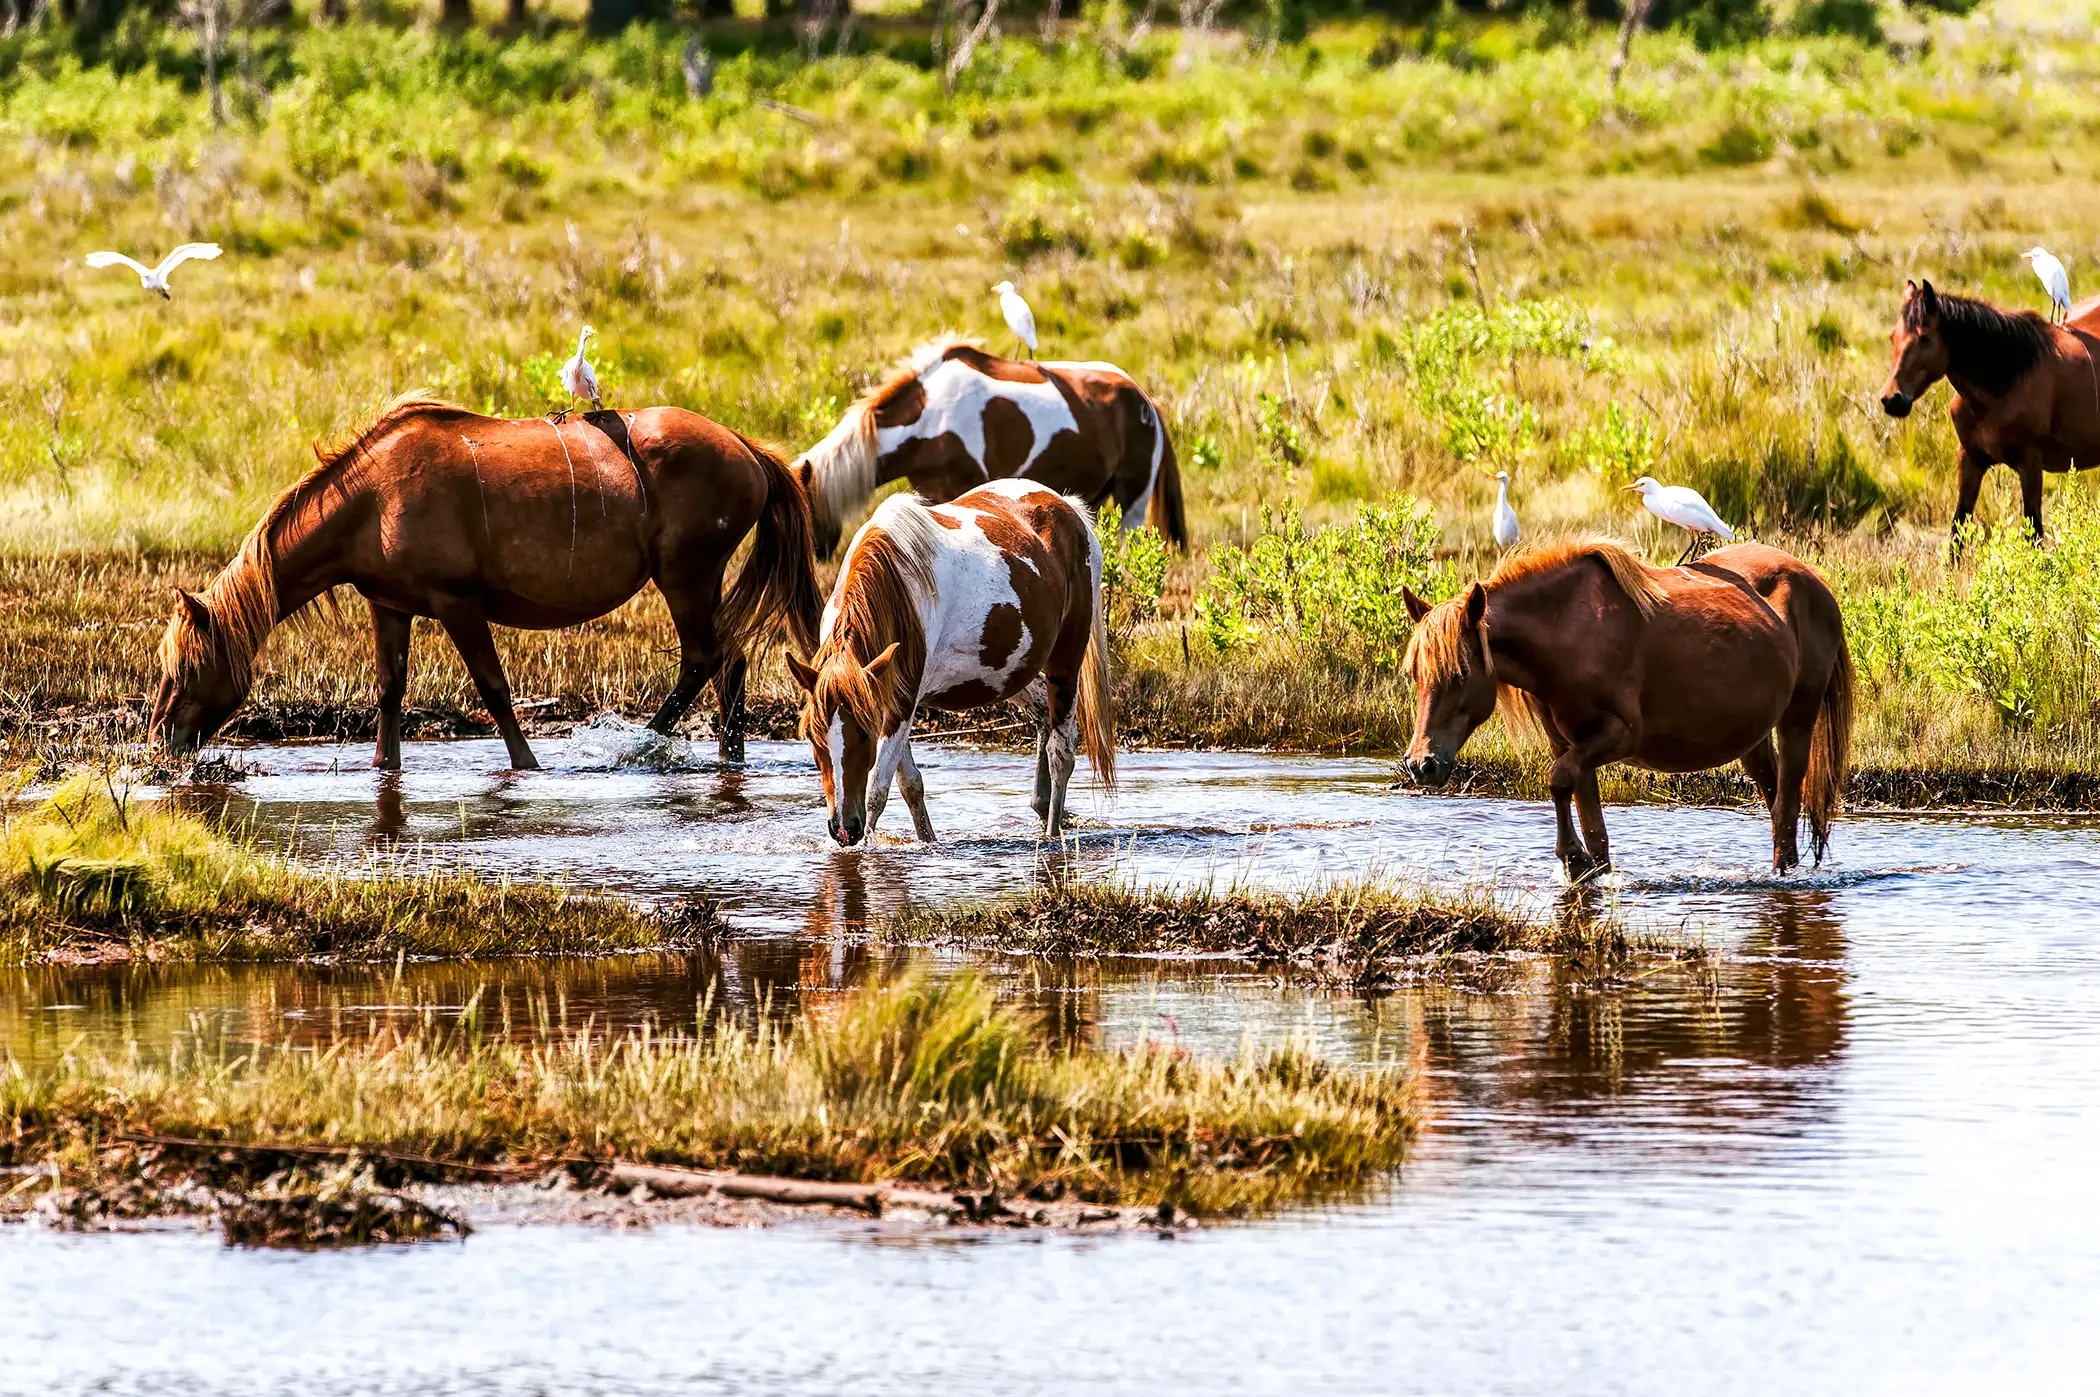 Several cattle egrets were riding these wild horses, Chincoteague Island, Virginia.